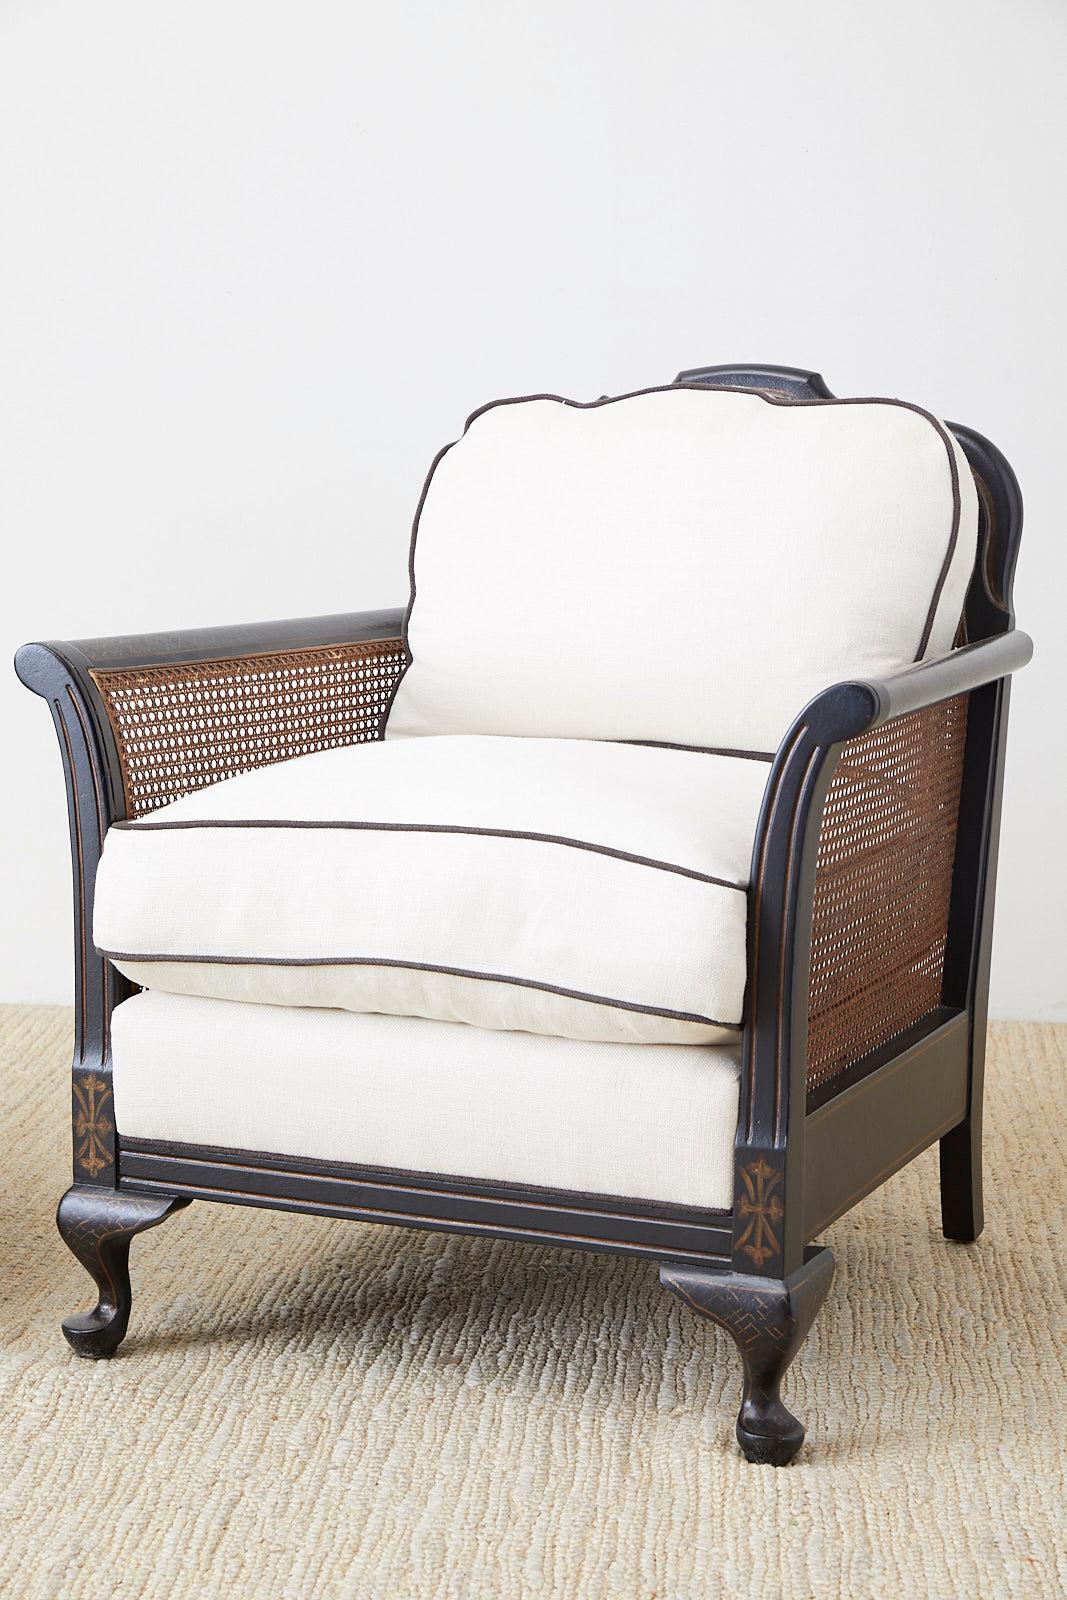 Italian Pair of Ebonized Cane Bergere Lounge Chairs with Linen